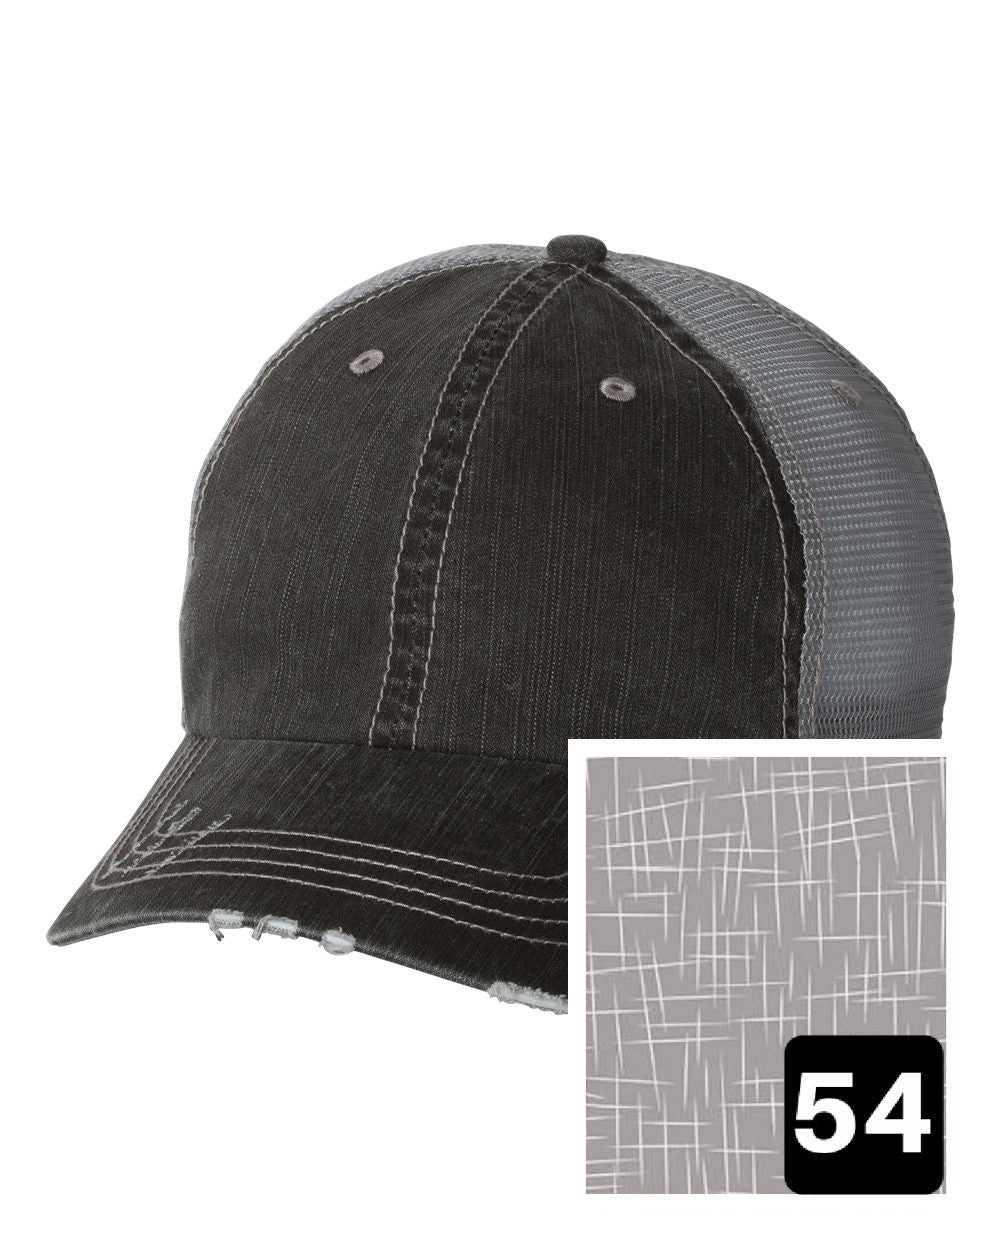 gray distressed trucker hat with multi-color stripe fabric state of Maine